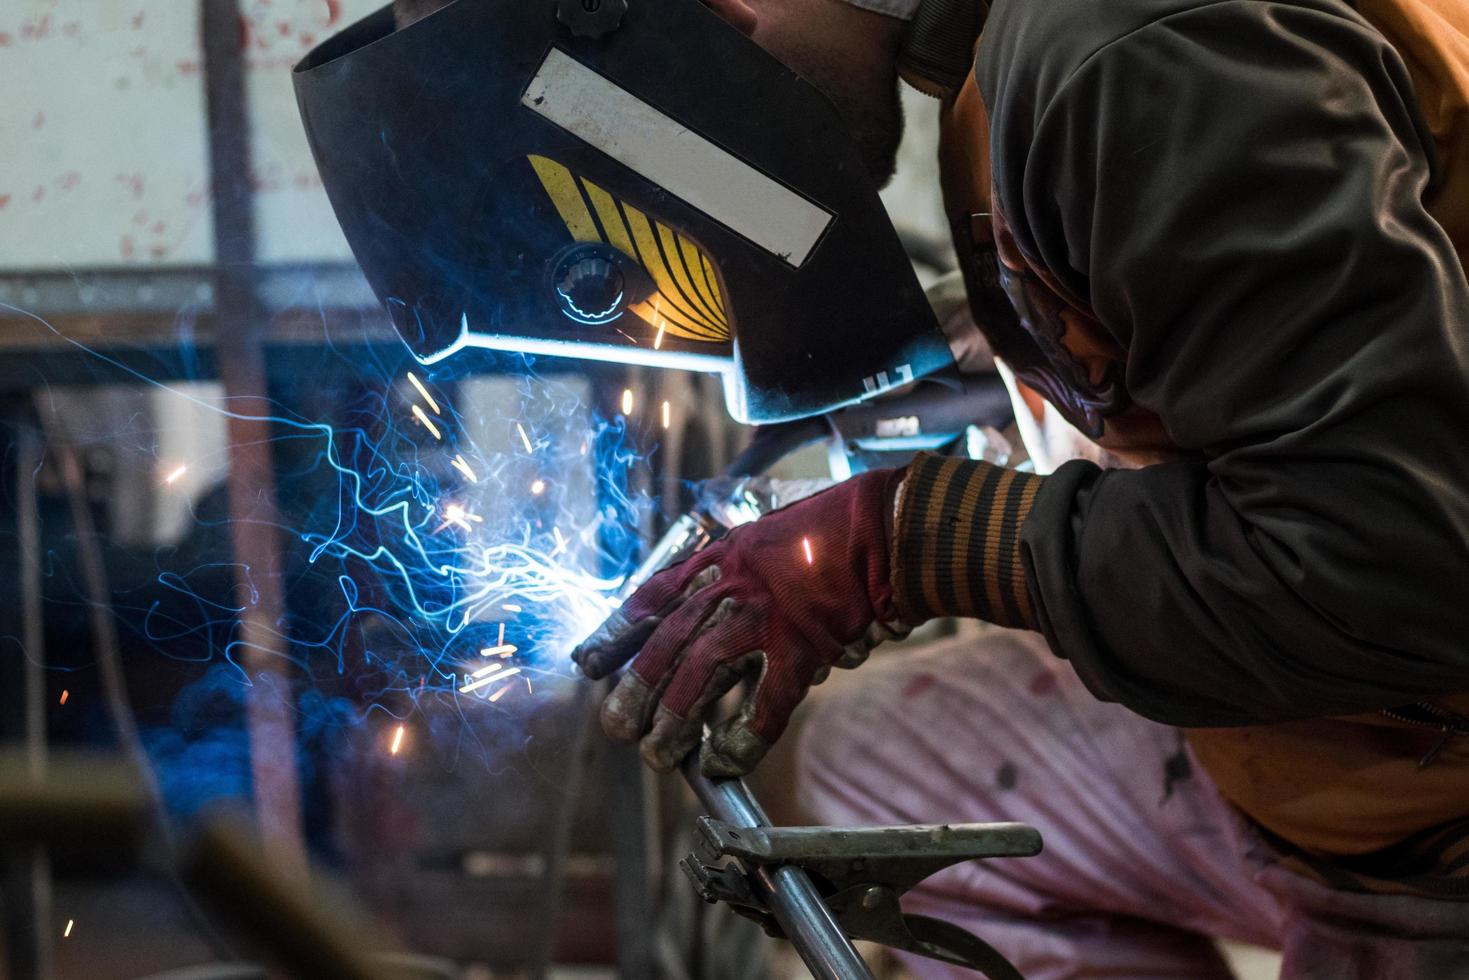 Workers in the mask are welding steel in workshop photo